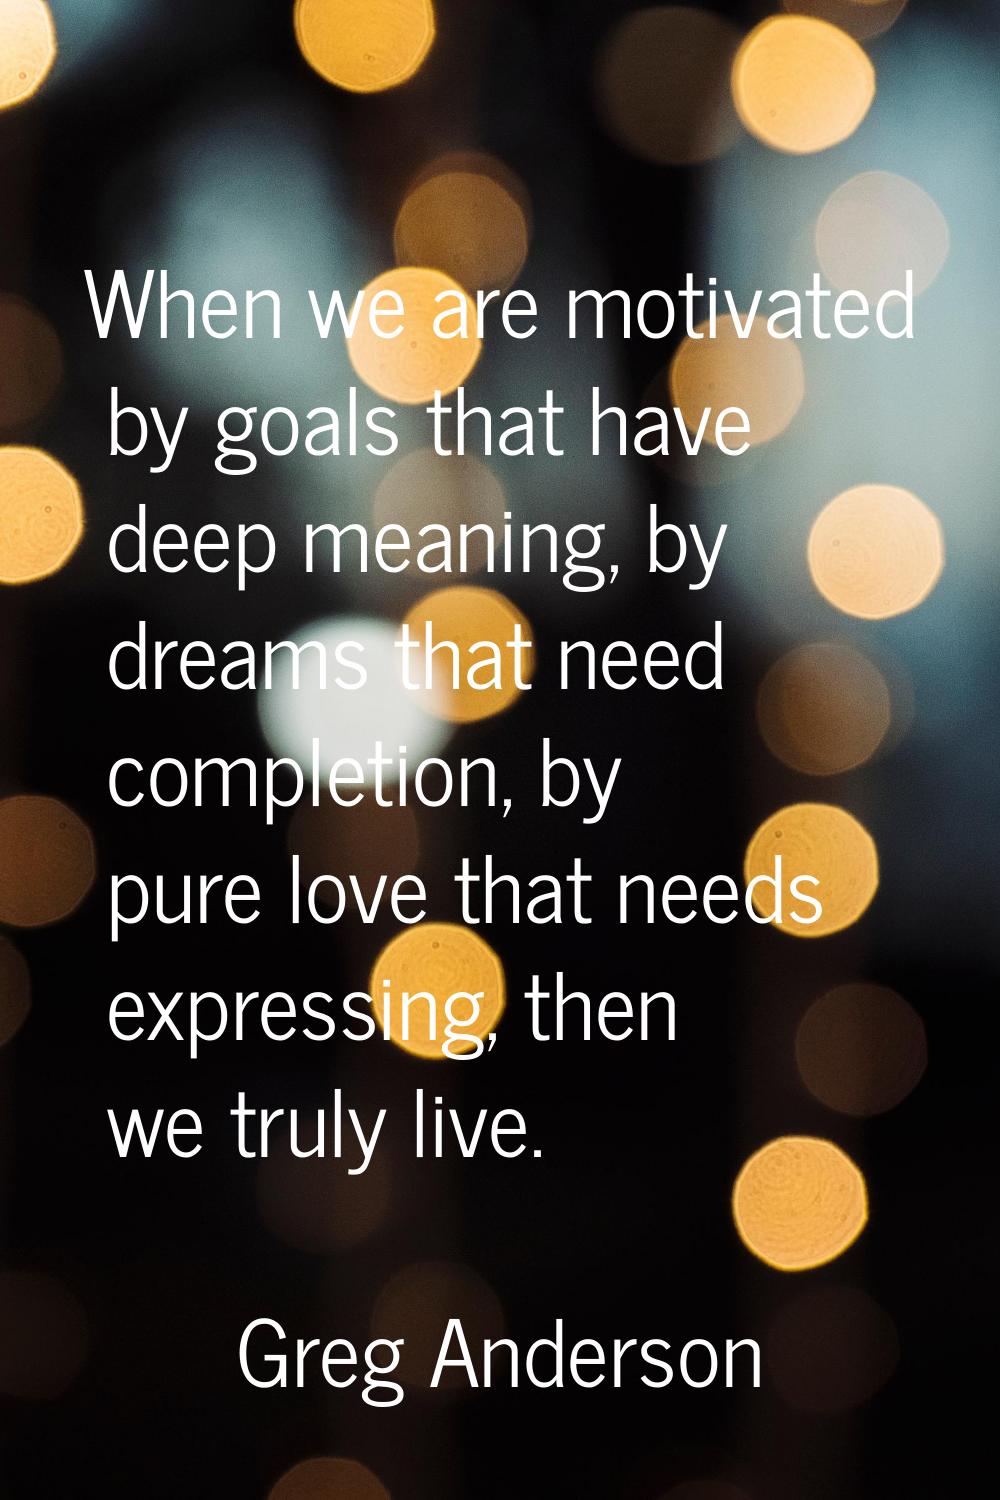 When we are motivated by goals that have deep meaning, by dreams that need completion, by pure love